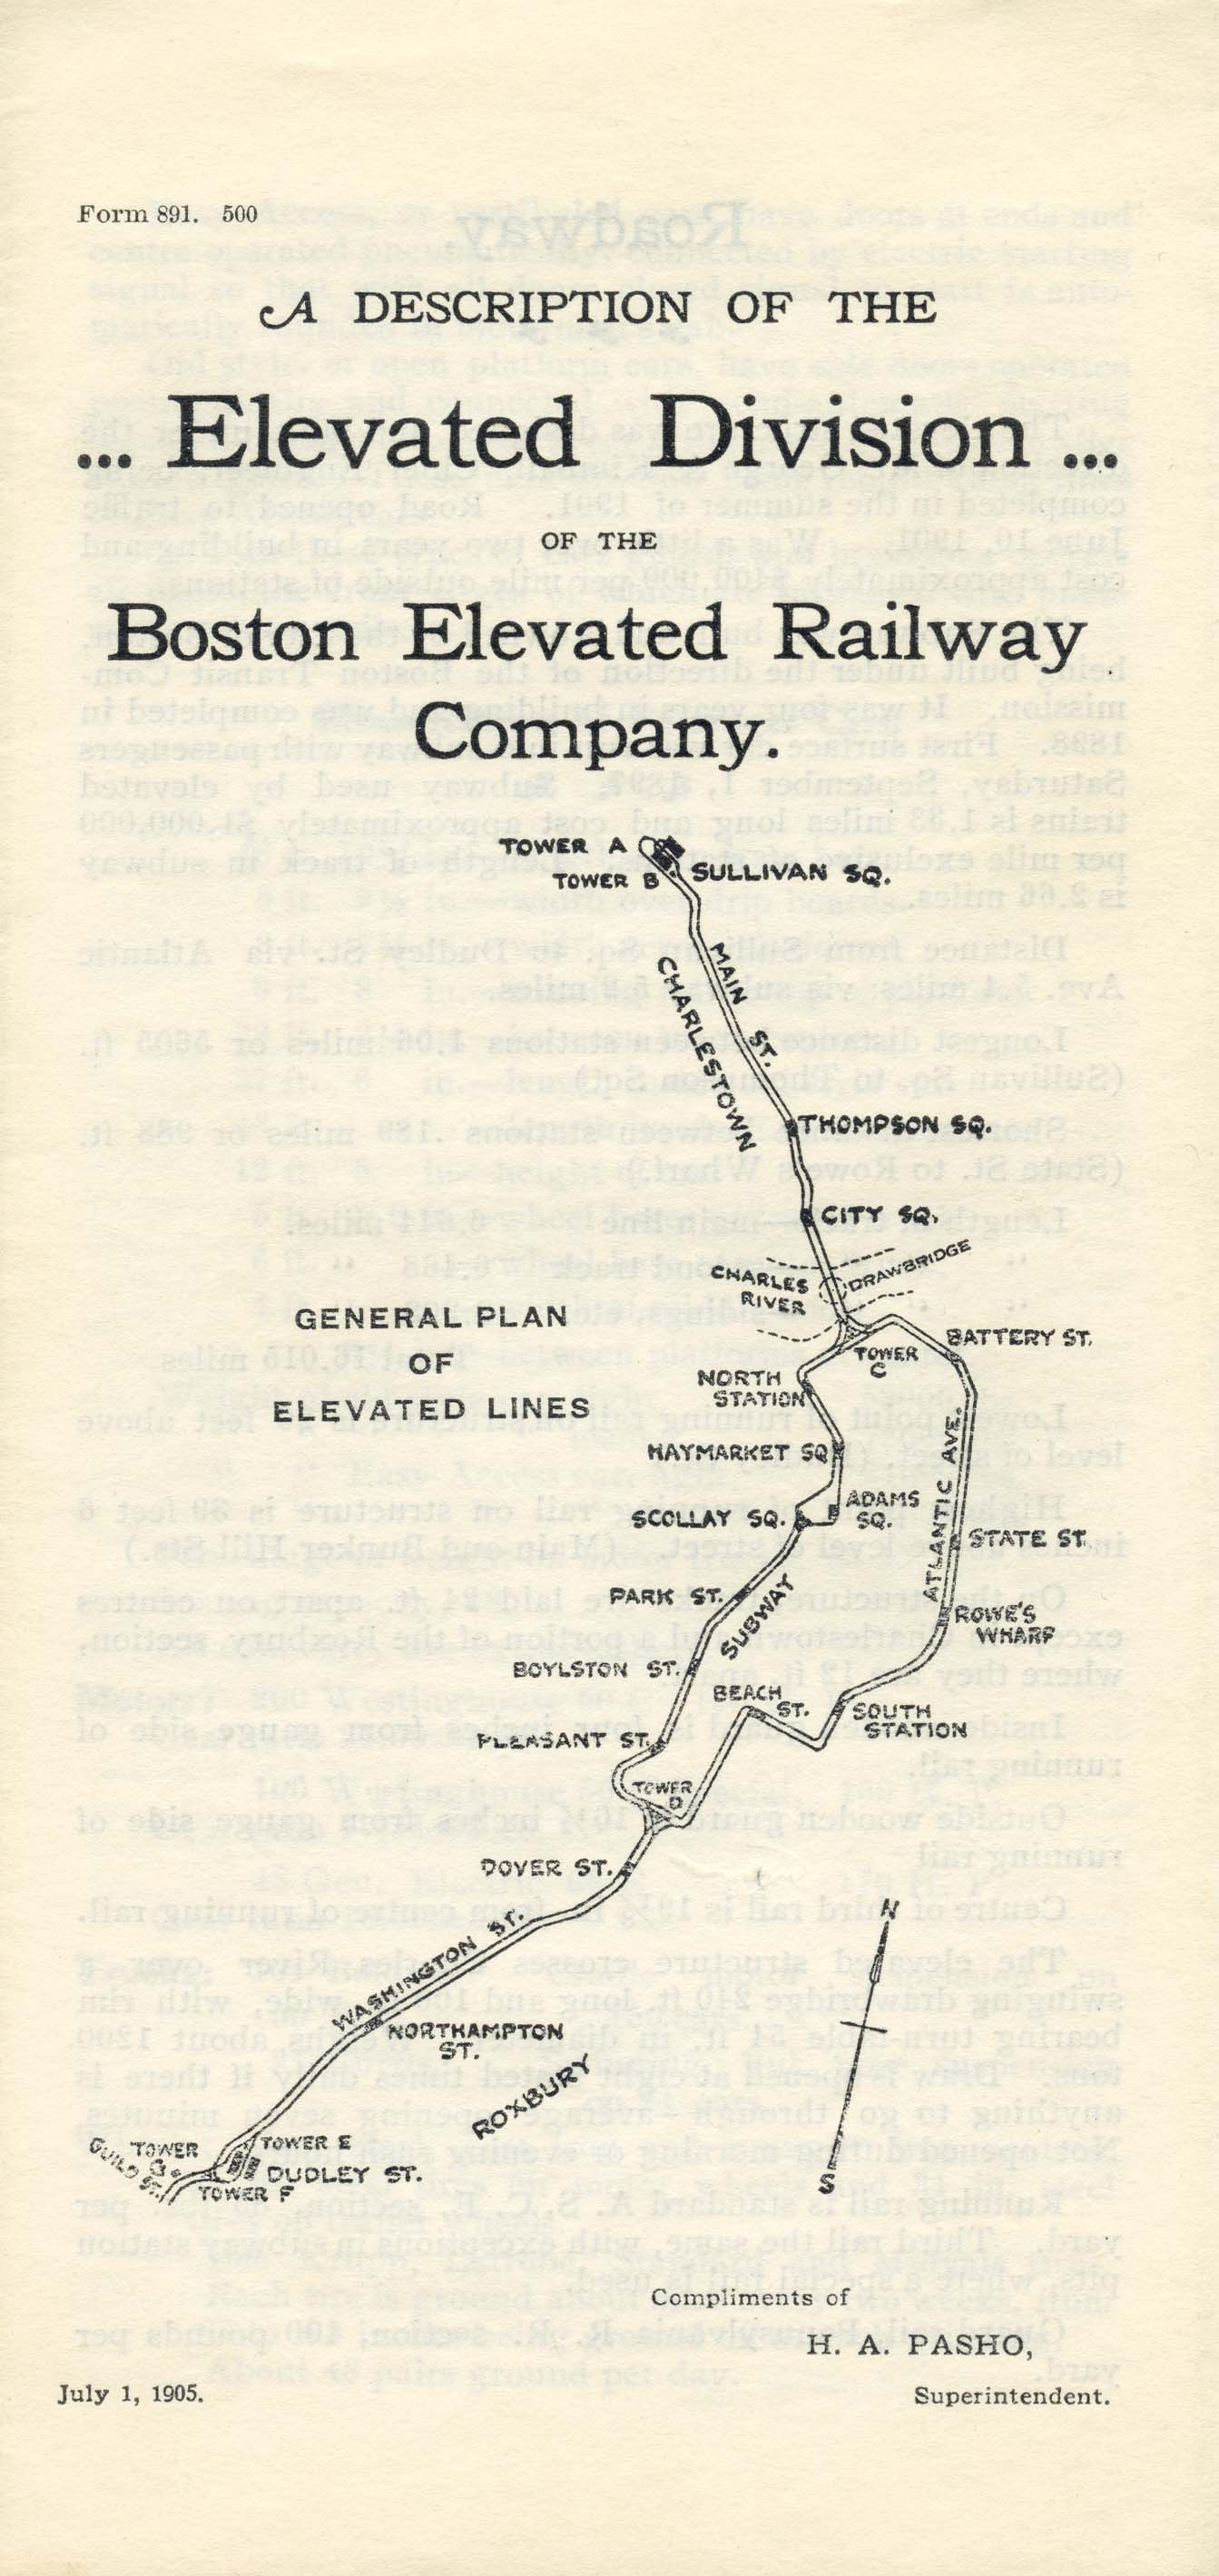 Image of Cover Page from “A Description of the Elevated Division of the Boston Elevated Railway Company”